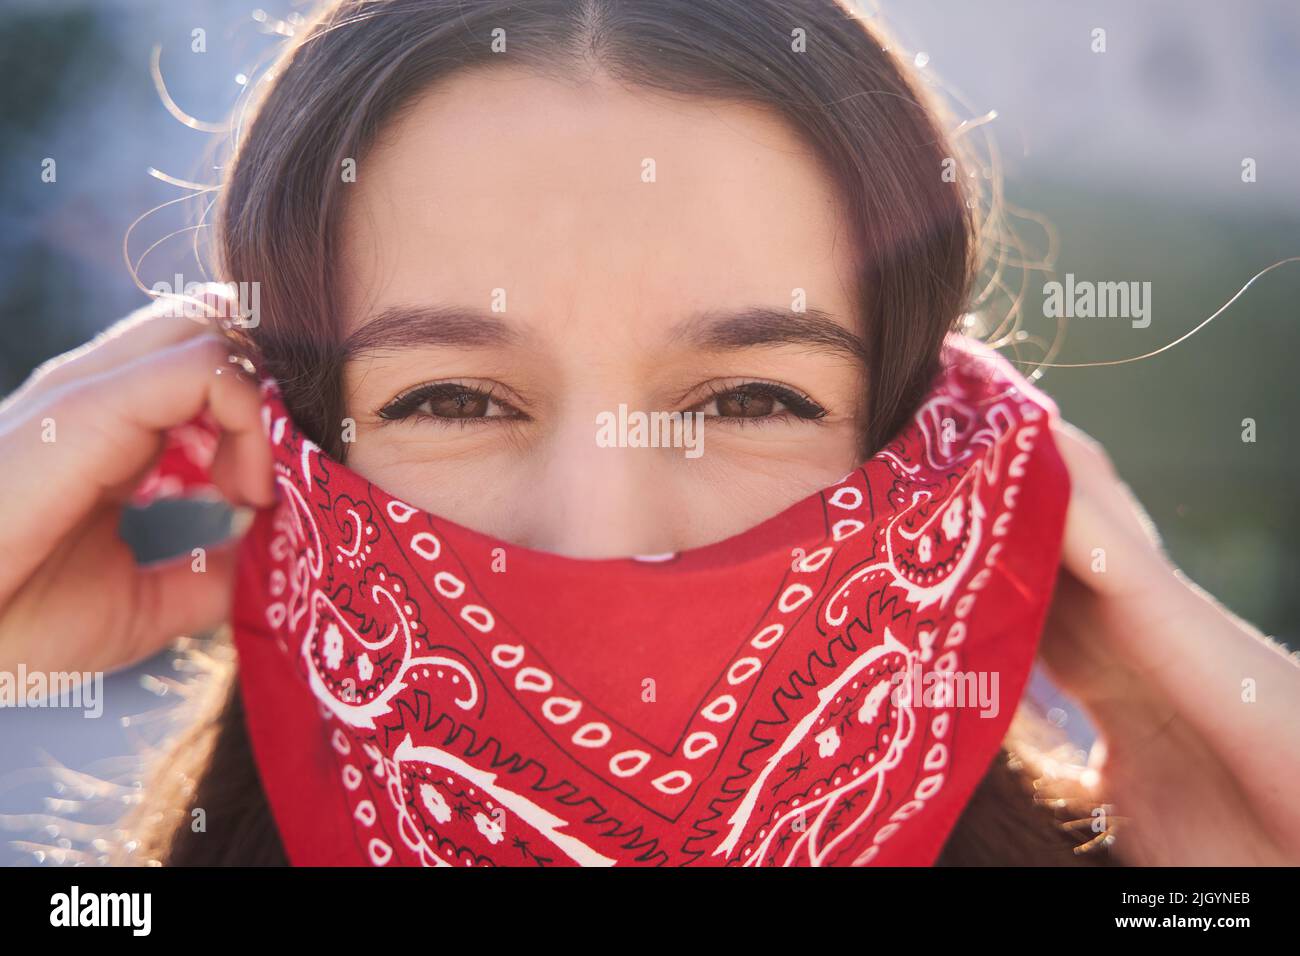 Young brunette woman wearing red bandana covering half of face, looking at camera, activist protest concept. Stock Photo